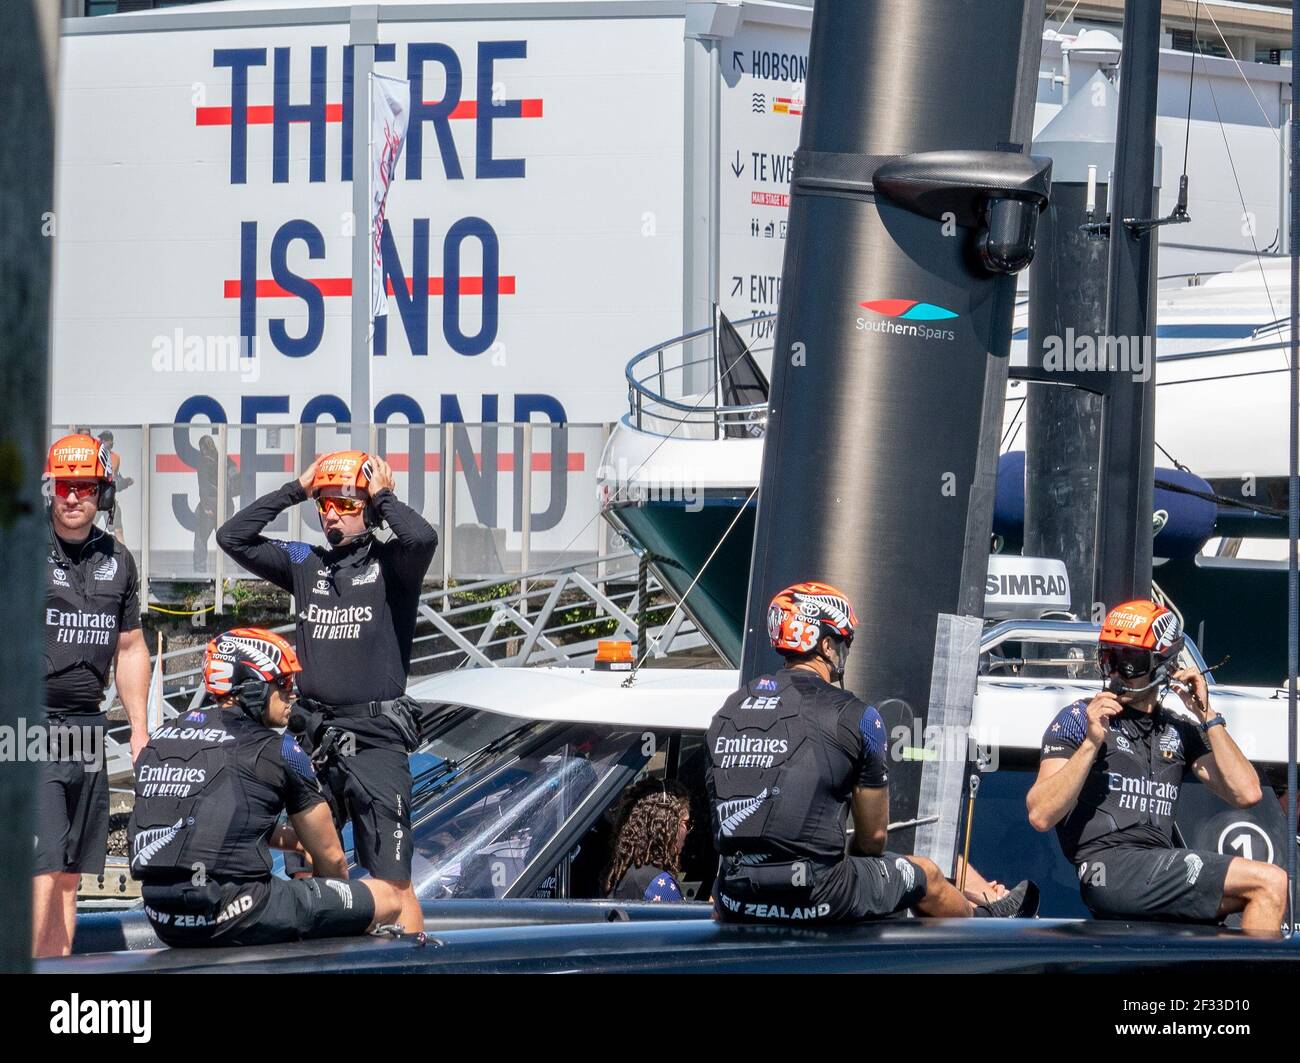 Auckland, New Zealand, 15 March, 2021 -  Emirates Team New Zealand (ETNZ), skipper  Peter Burling  (right) onboard Te Rehutai as the boat passes a sign saying 'THERE IS NO  SECOND' on leaving dock ahead of Day 5 of the 36th America's Cup.  ETNZ won both races and leads the series 5-2. Credit: Rob Taggart/Alamy Live News Stock Photo